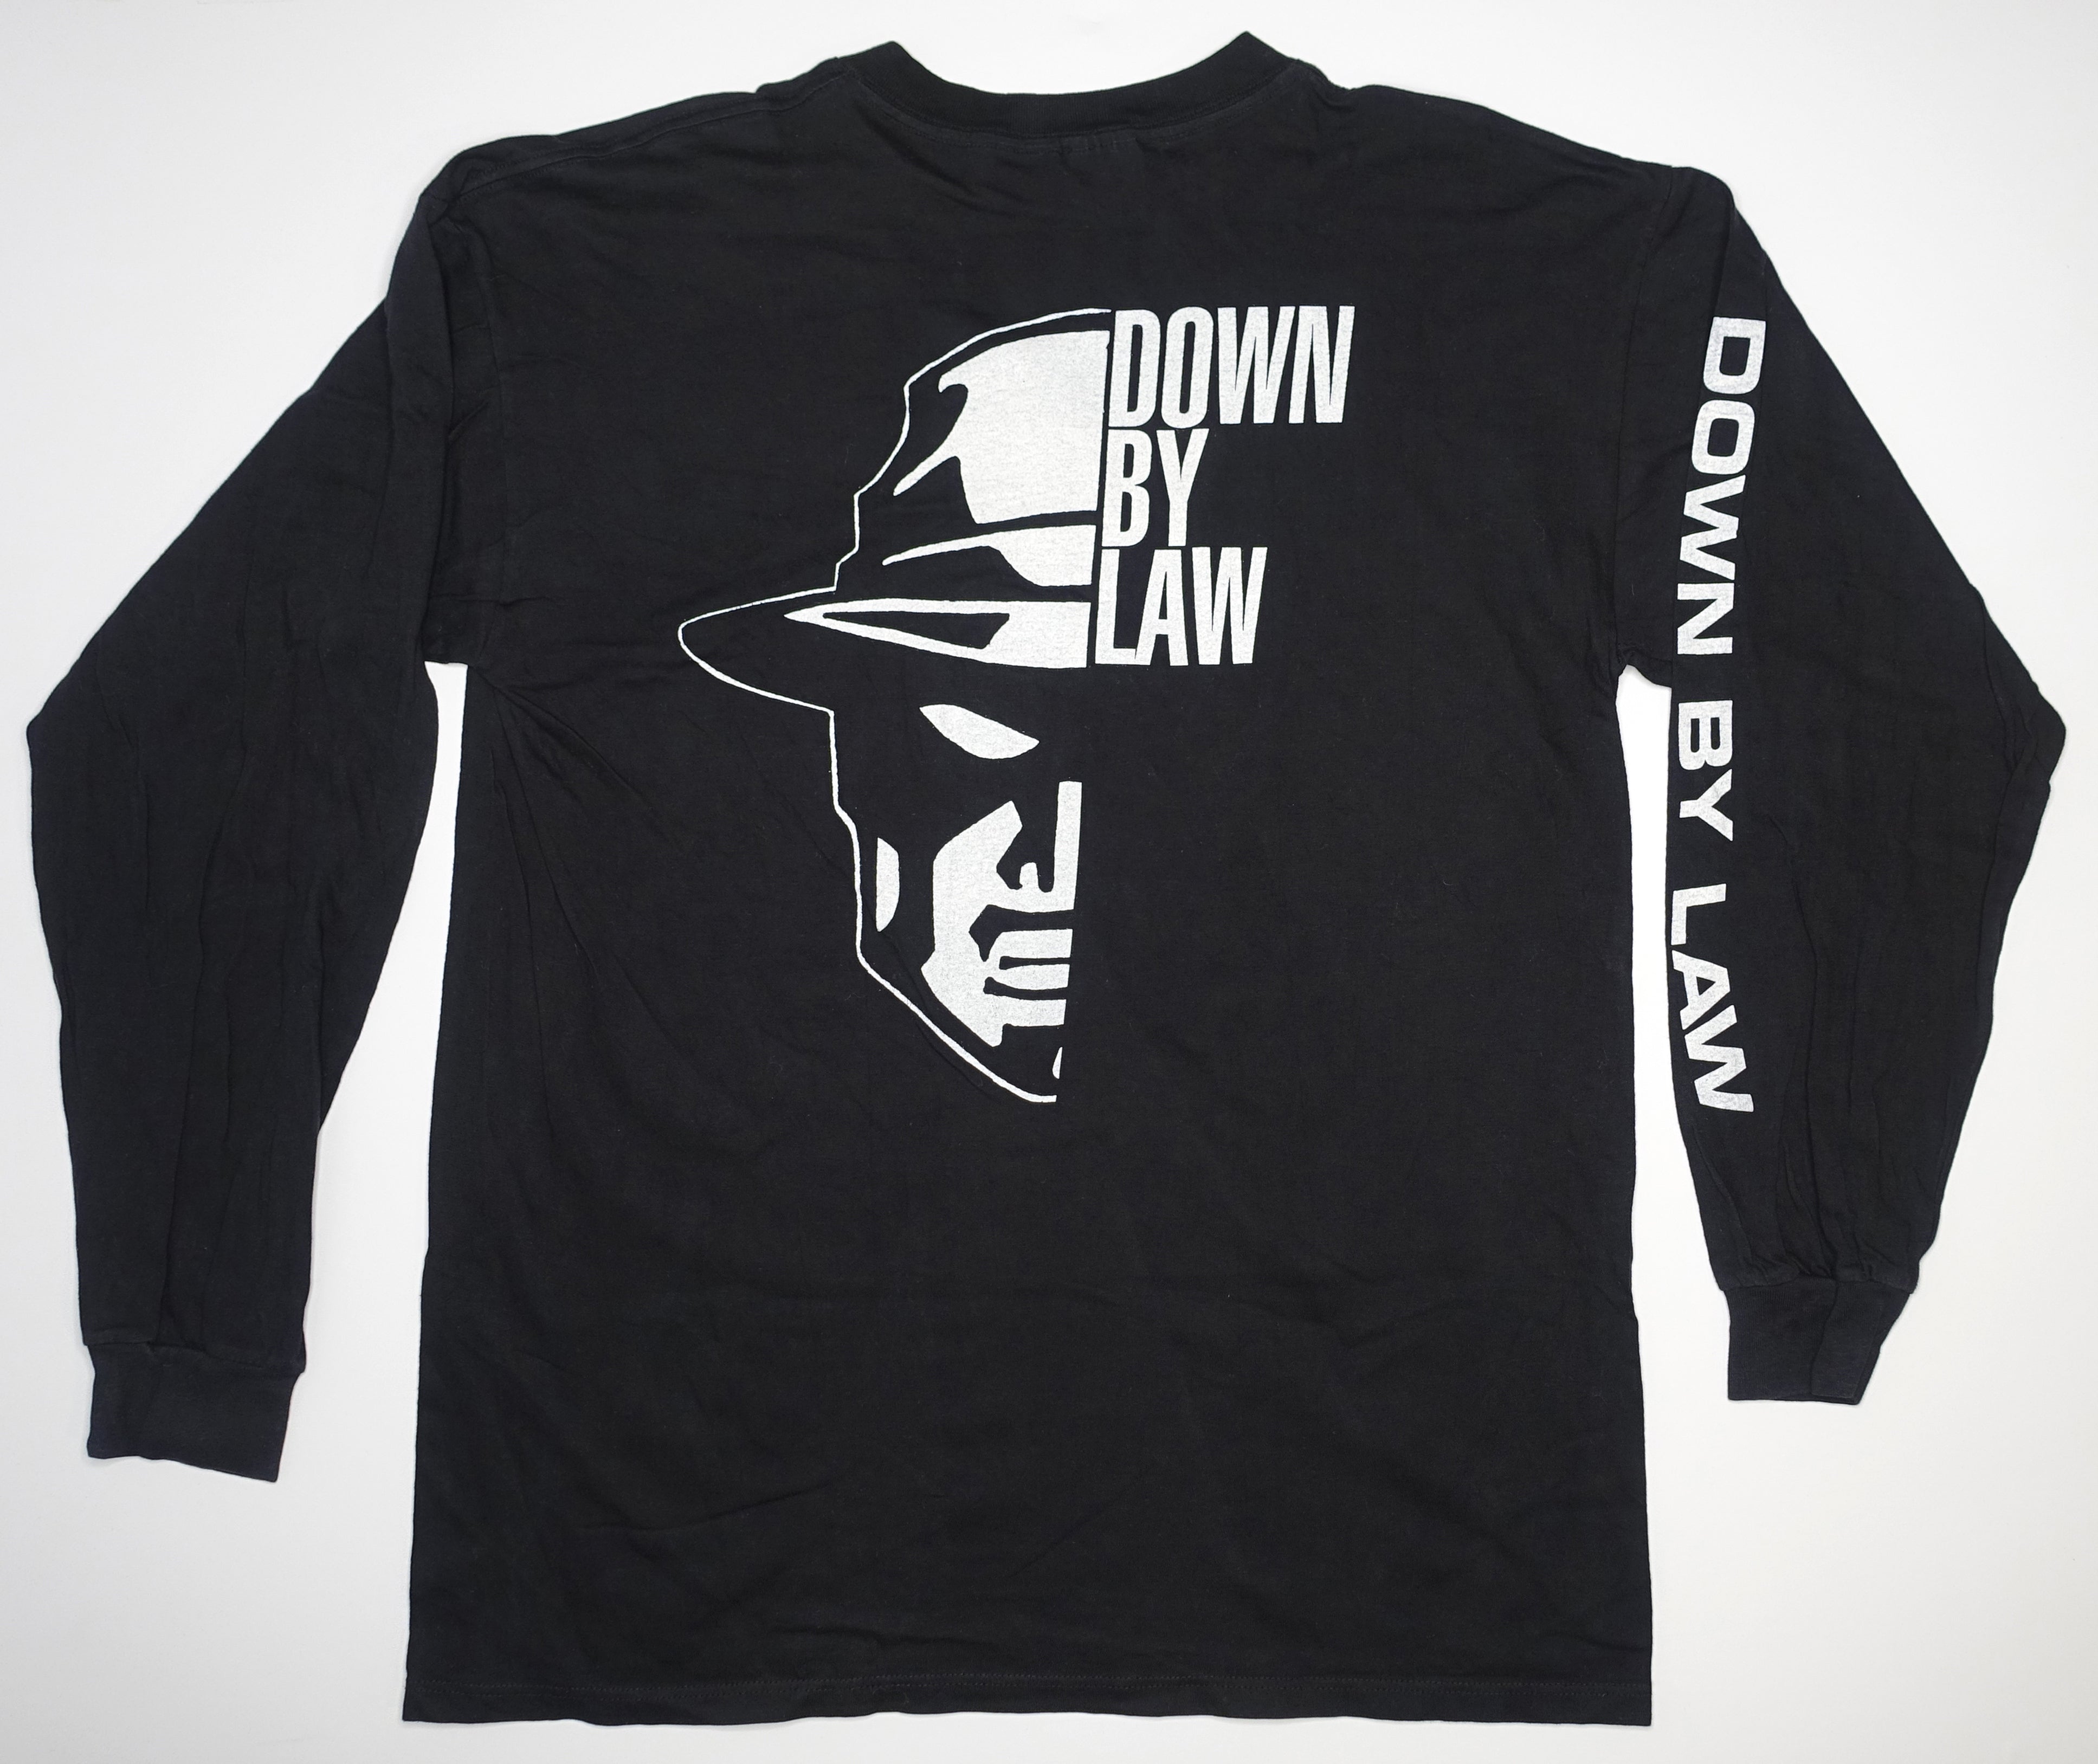 Down By Law - Hat Guy Long Sleeve Tour Shirt Size XL